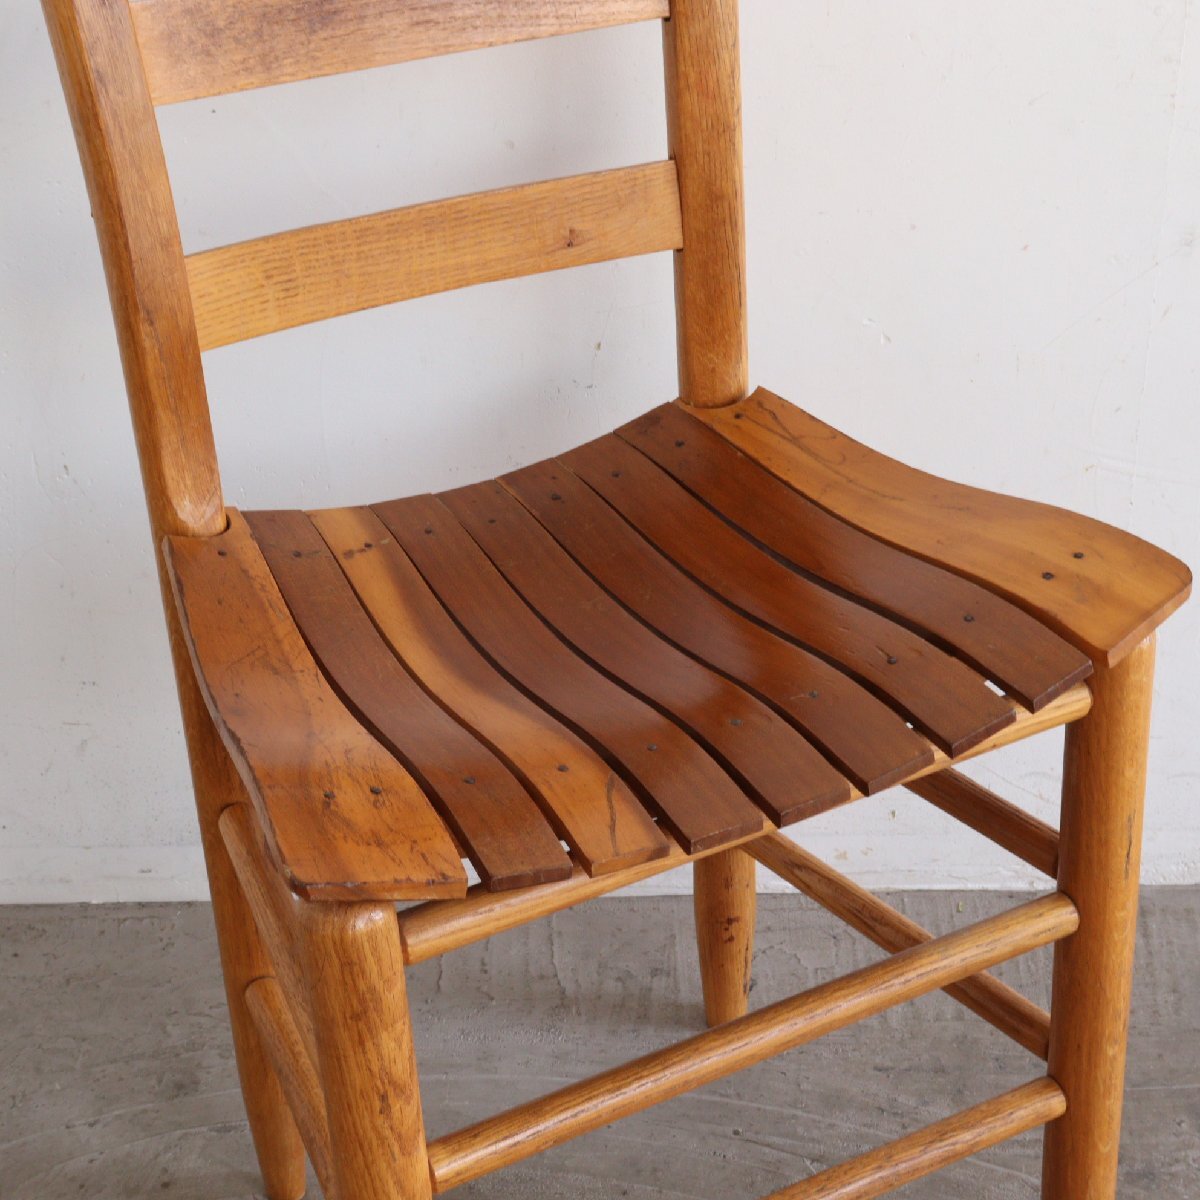  America Vintage wooden dining chair / Country style antique chair Cafe store furniture USA wood #602-30-245-146